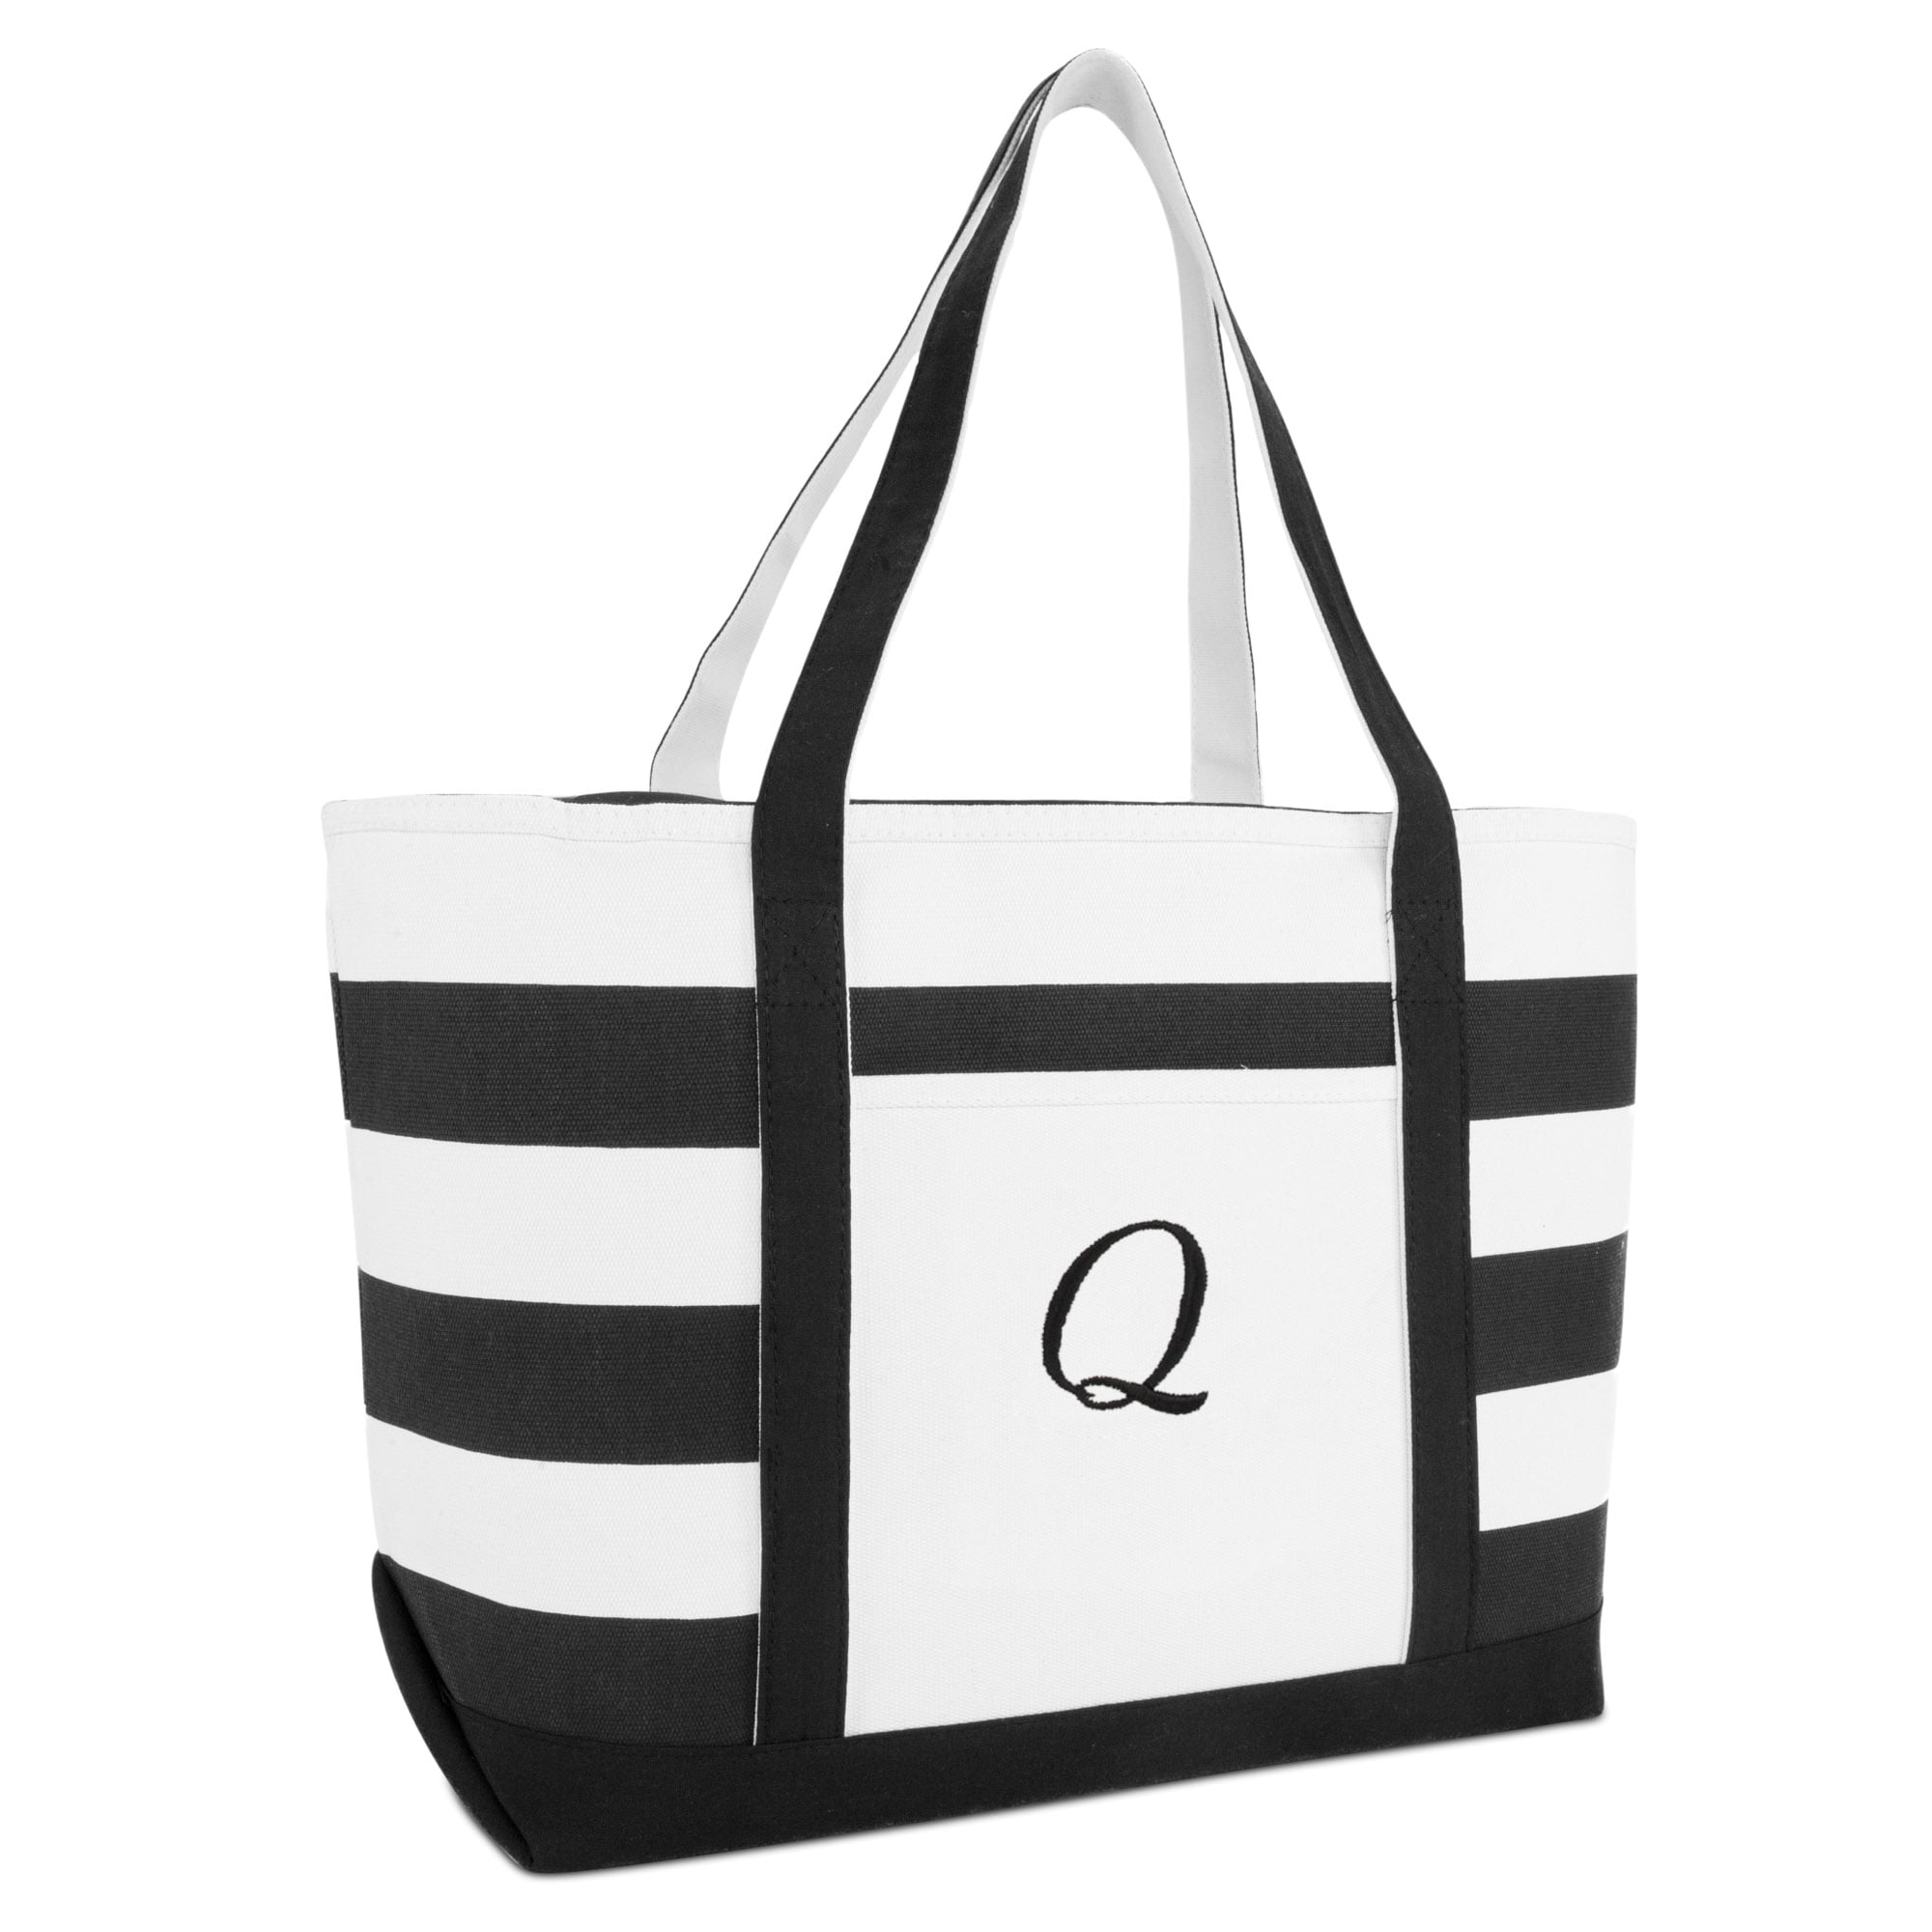 Custom Tote Bag Personalized Faux Leather Tote Bag Monogrammed Tote Bag Personalized Bag